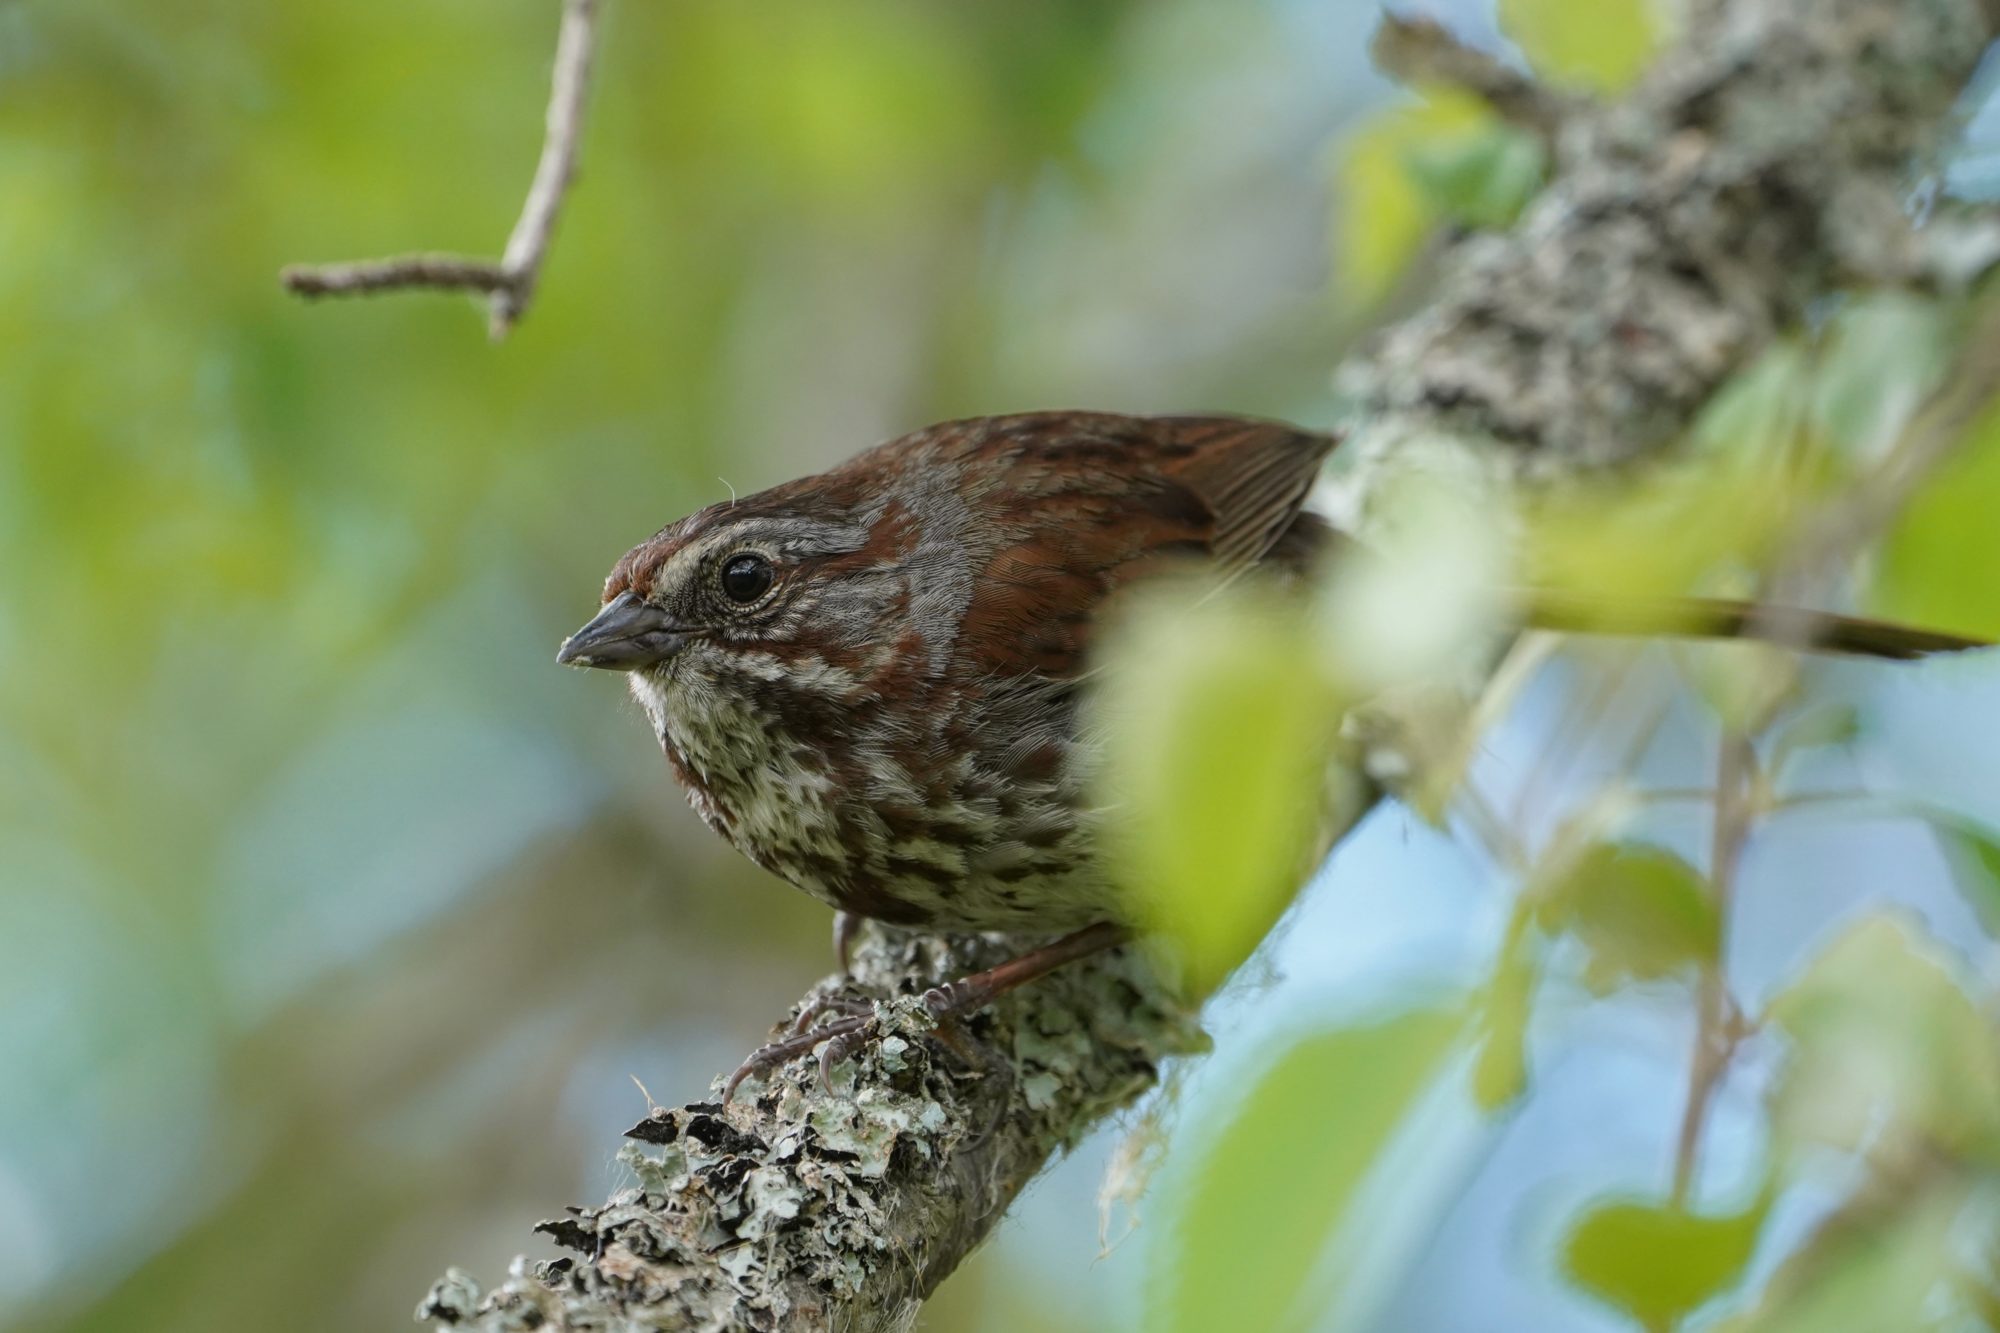 A Song Sparrow crouched on a tree branch, partly hidden by foliage